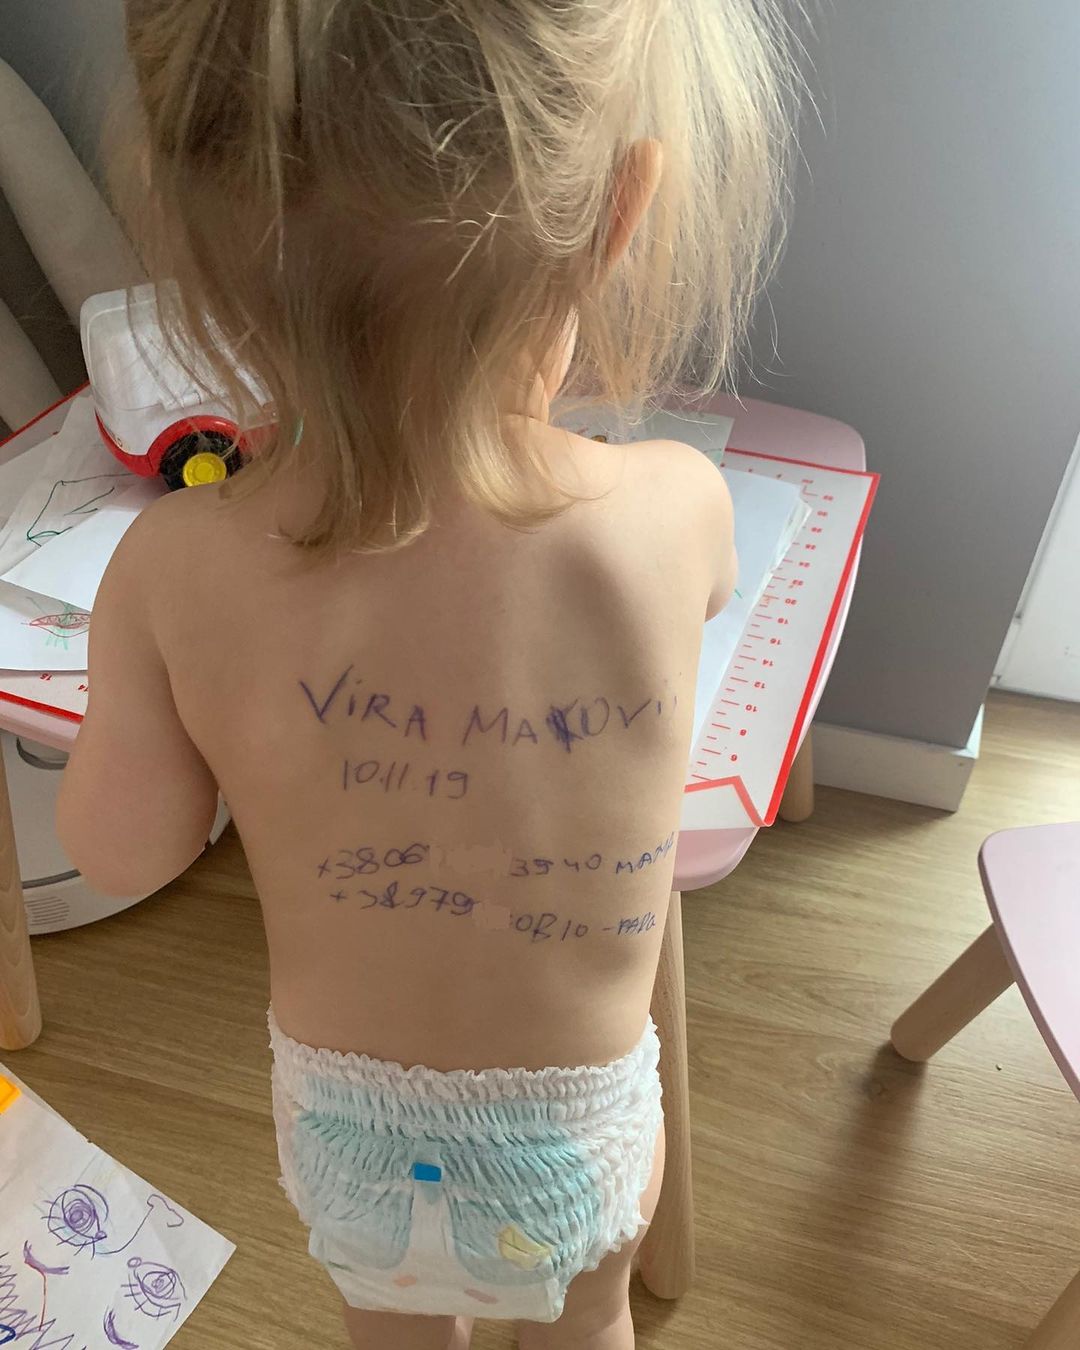 Vira Makoviy with her name and family contact details on her back